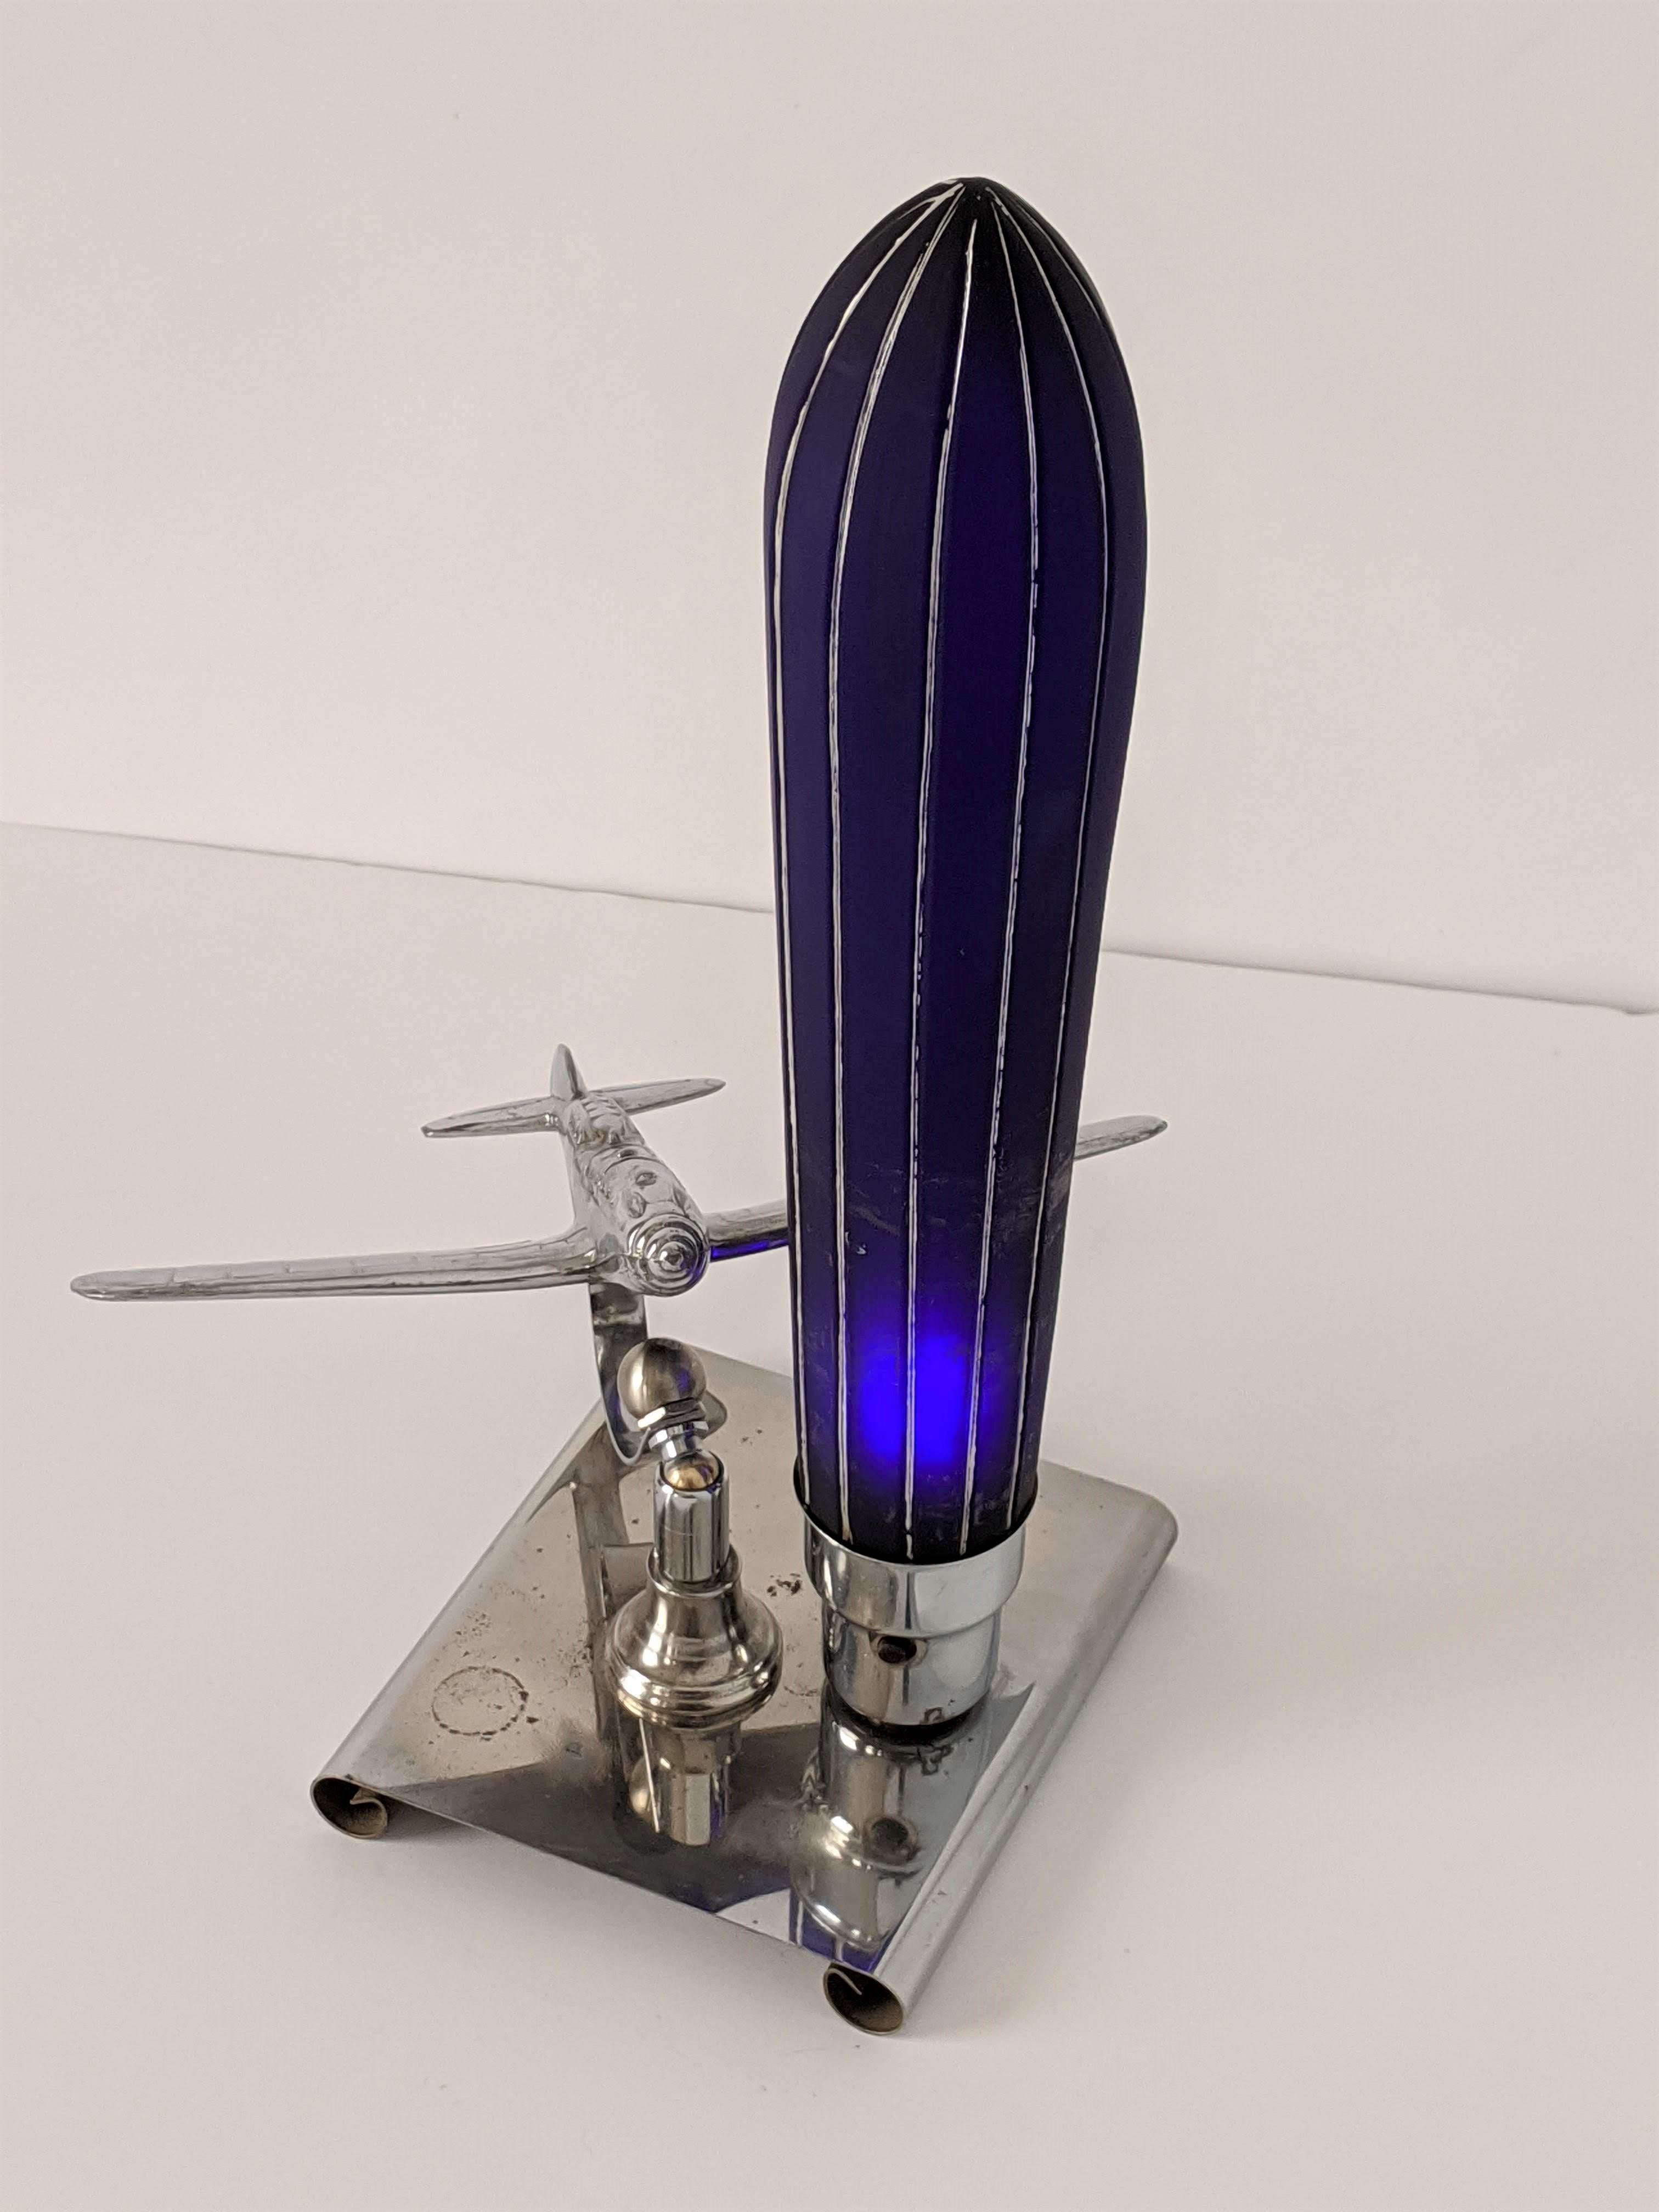 Metal 1930s Art Deco Chrome Airplane Table Lamp by Ray A. Schober, USA